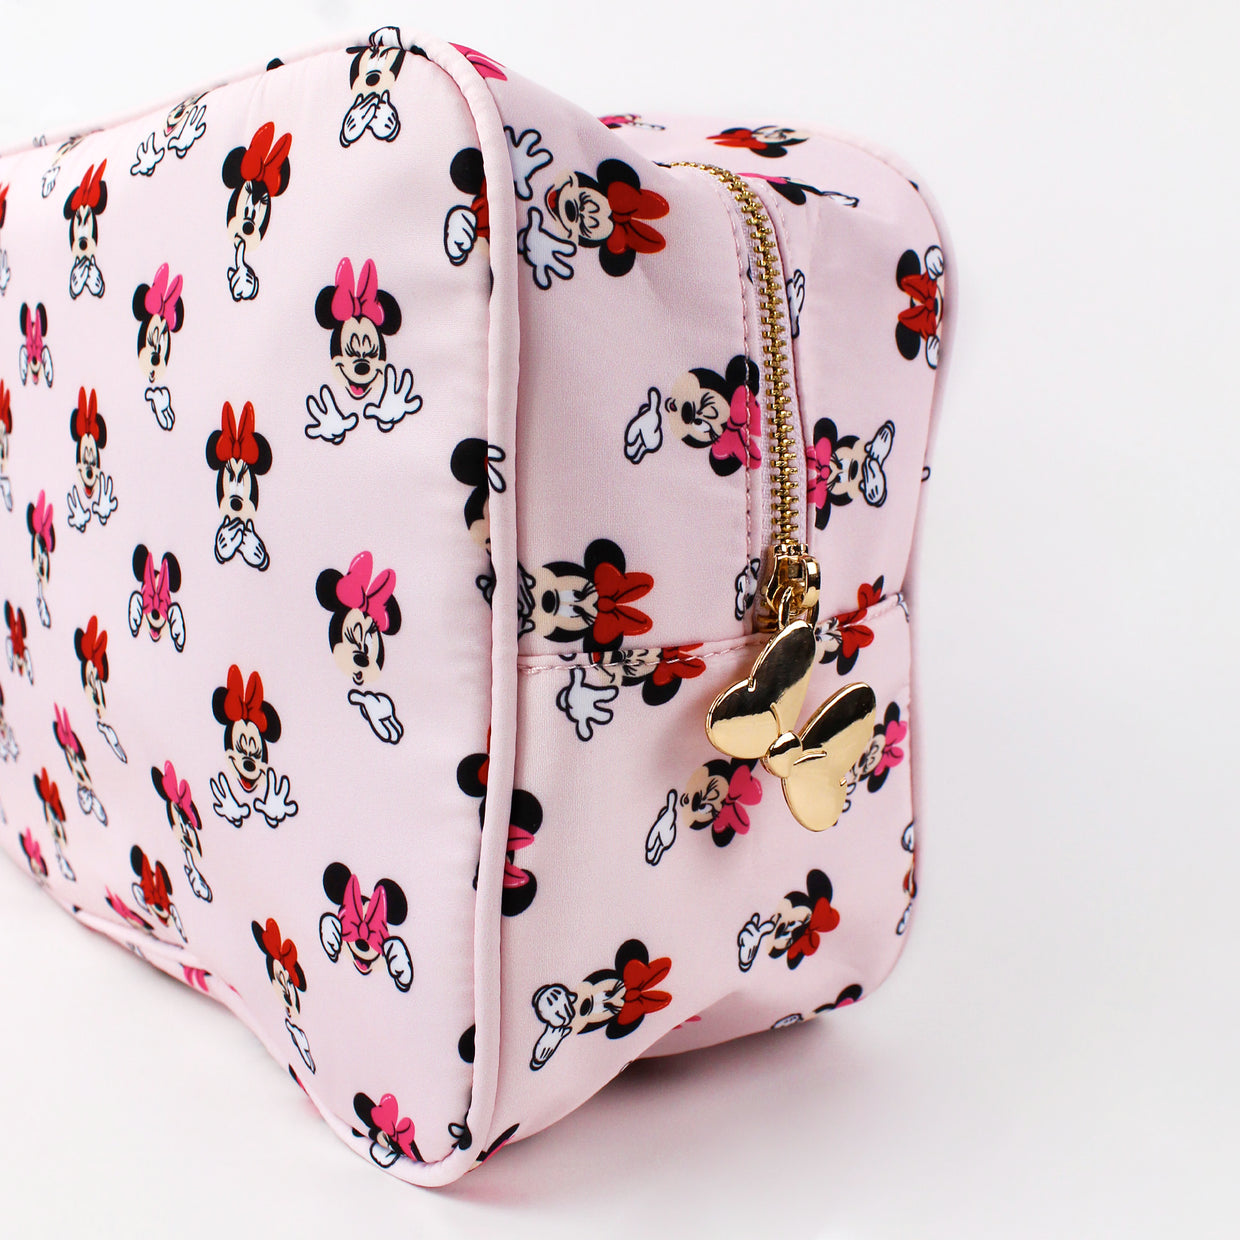 Minnie Mouse Expression Zip Pouch - Cakeworthy